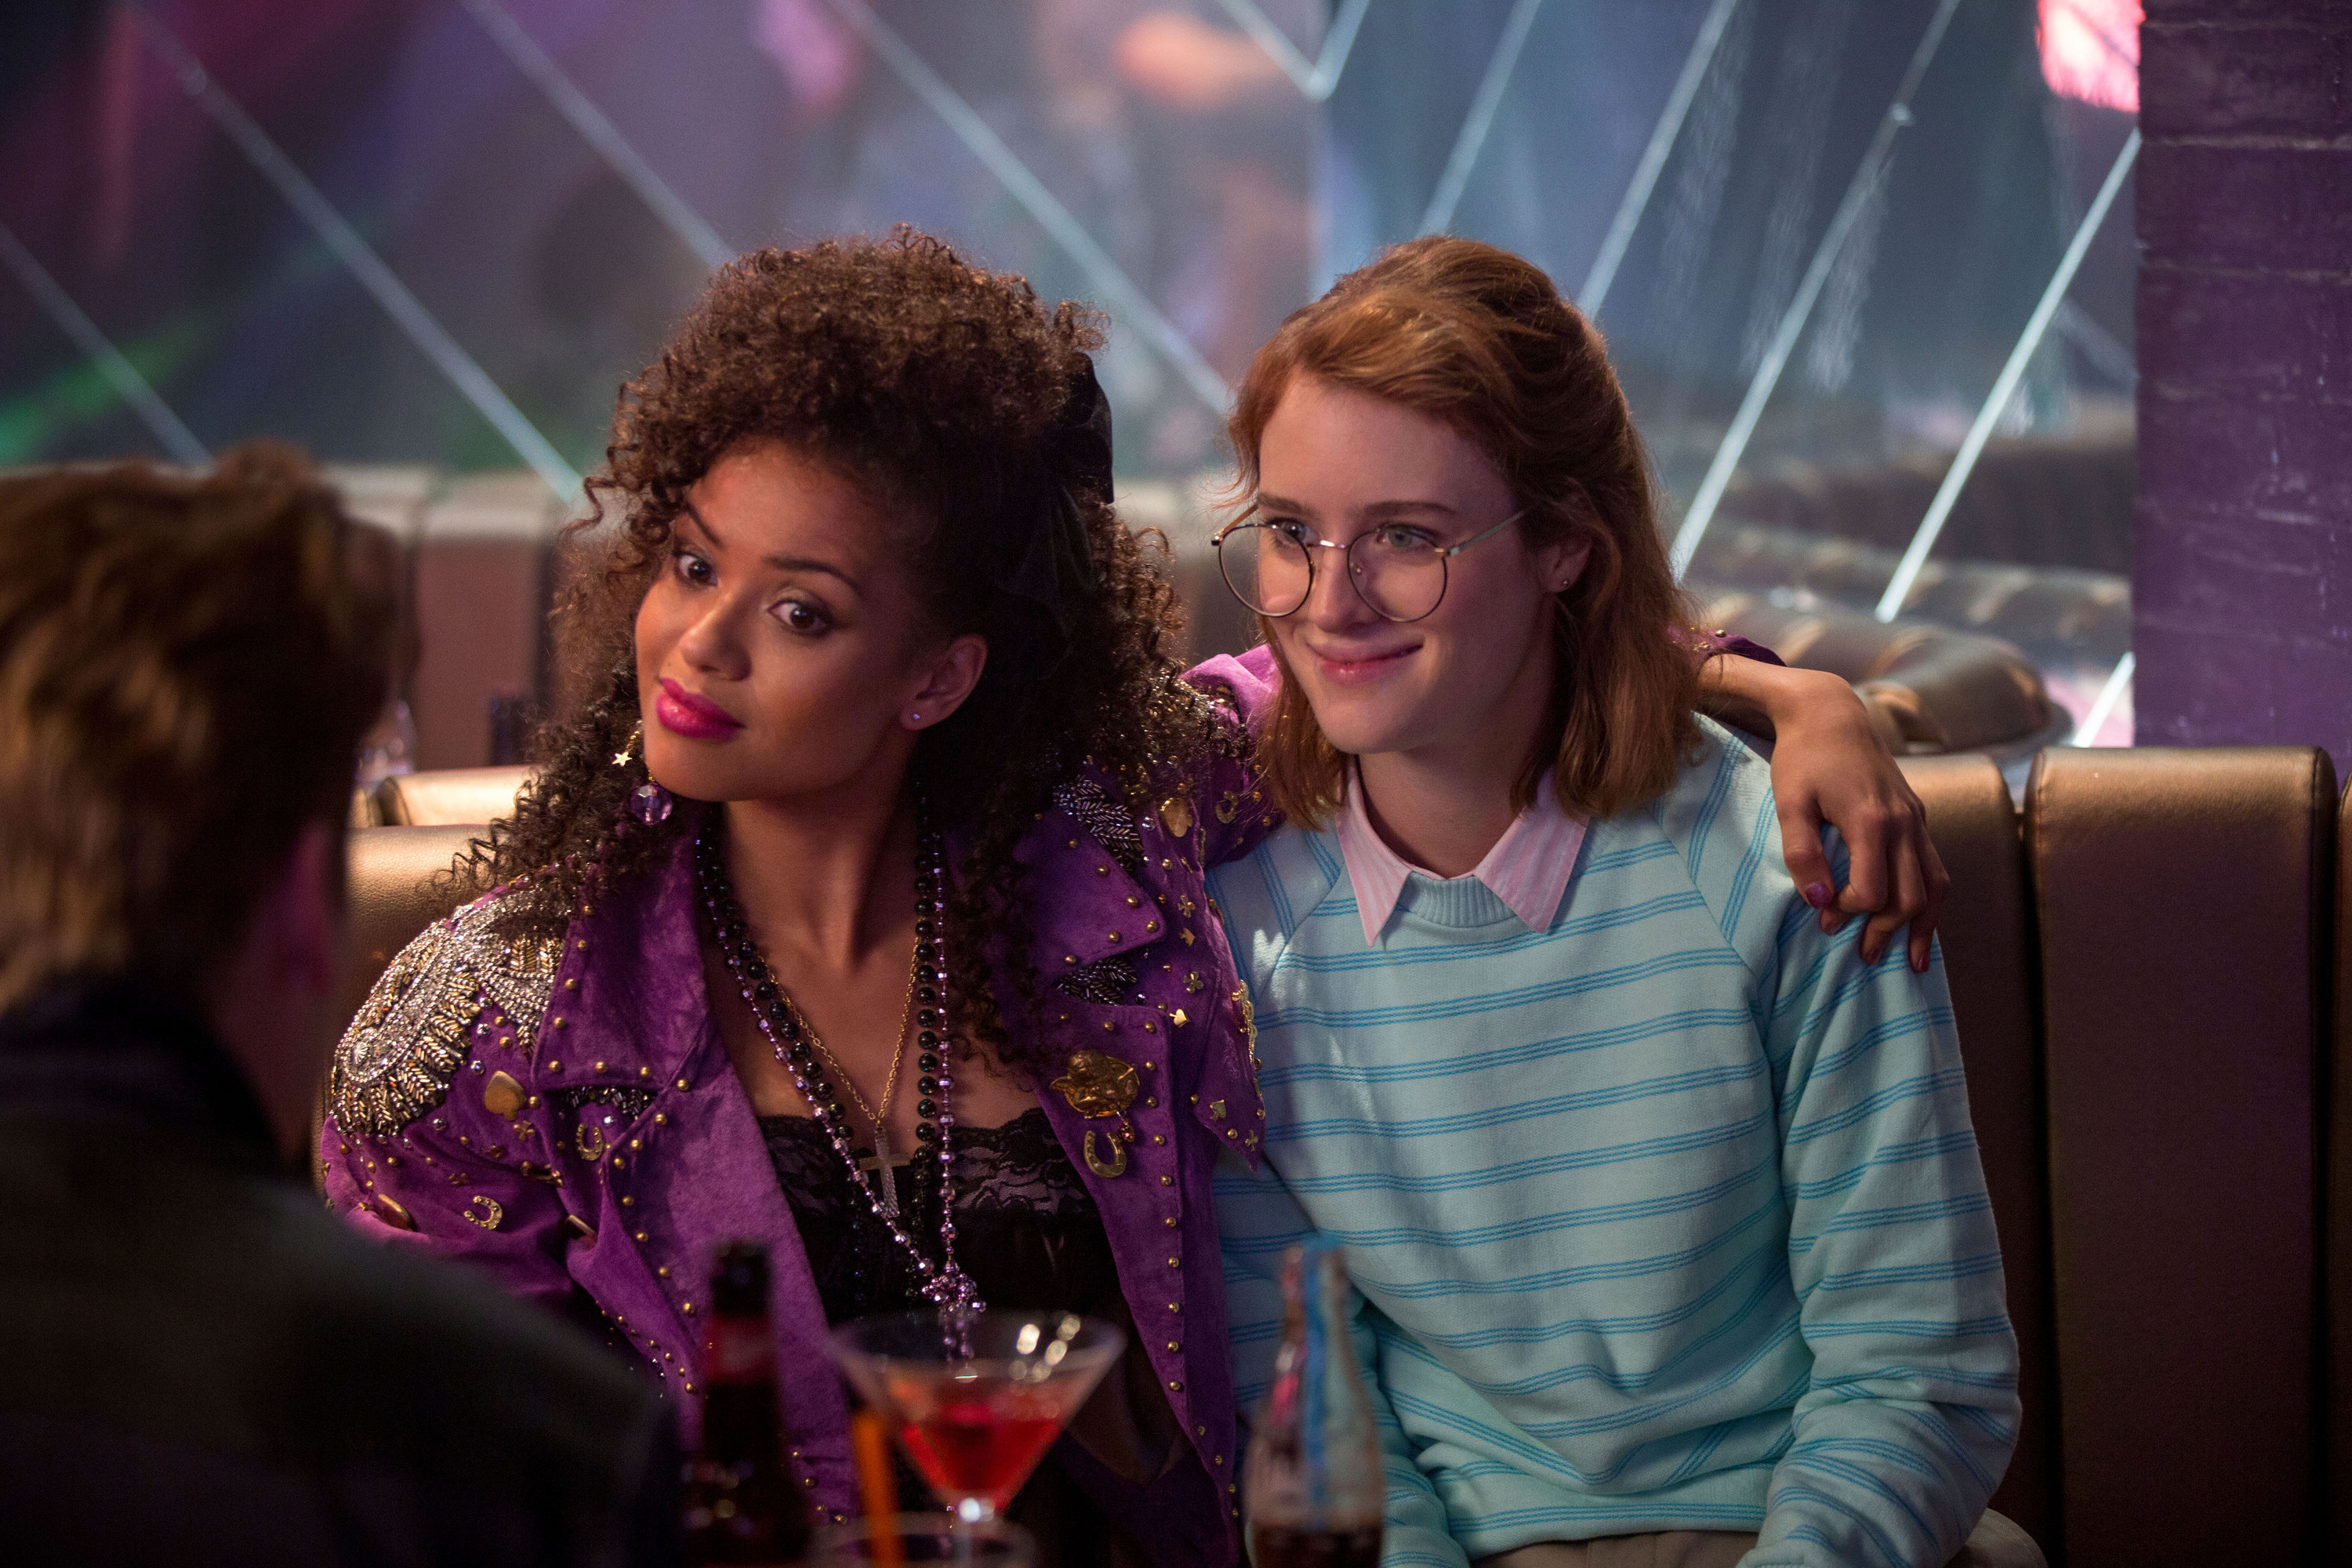 The two lovers from San Junipero